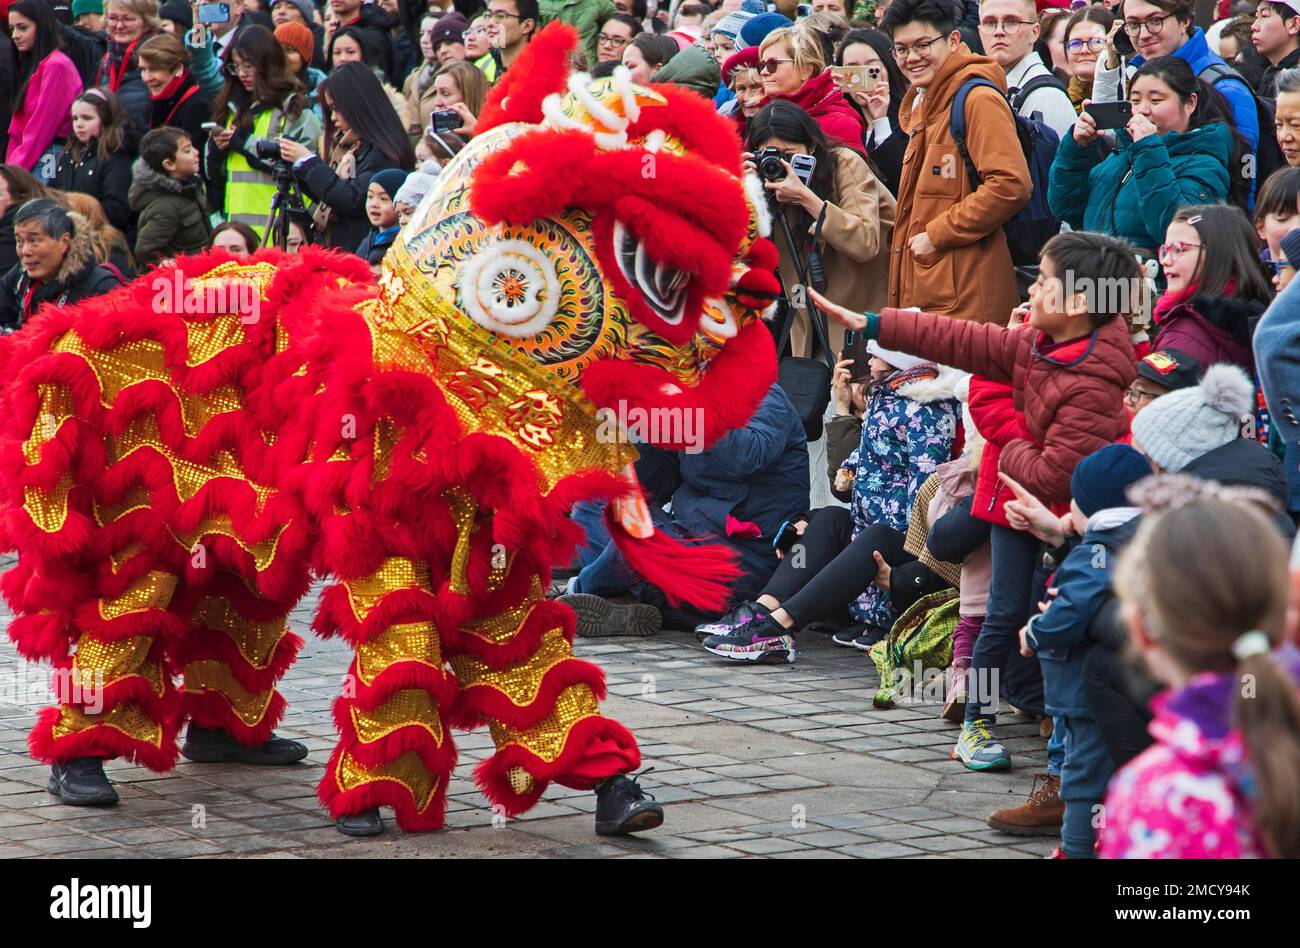 The Mound, Edinburgh, Scotland, UK. 22nd January 2023. Edinburgh city marks the Year of the Rabbit as the Chinese New Year launches today across the world. Pictured: Children in the audience interact with the giant Lion puppets. Credit: Arch White/alamy live news. Stock Photo